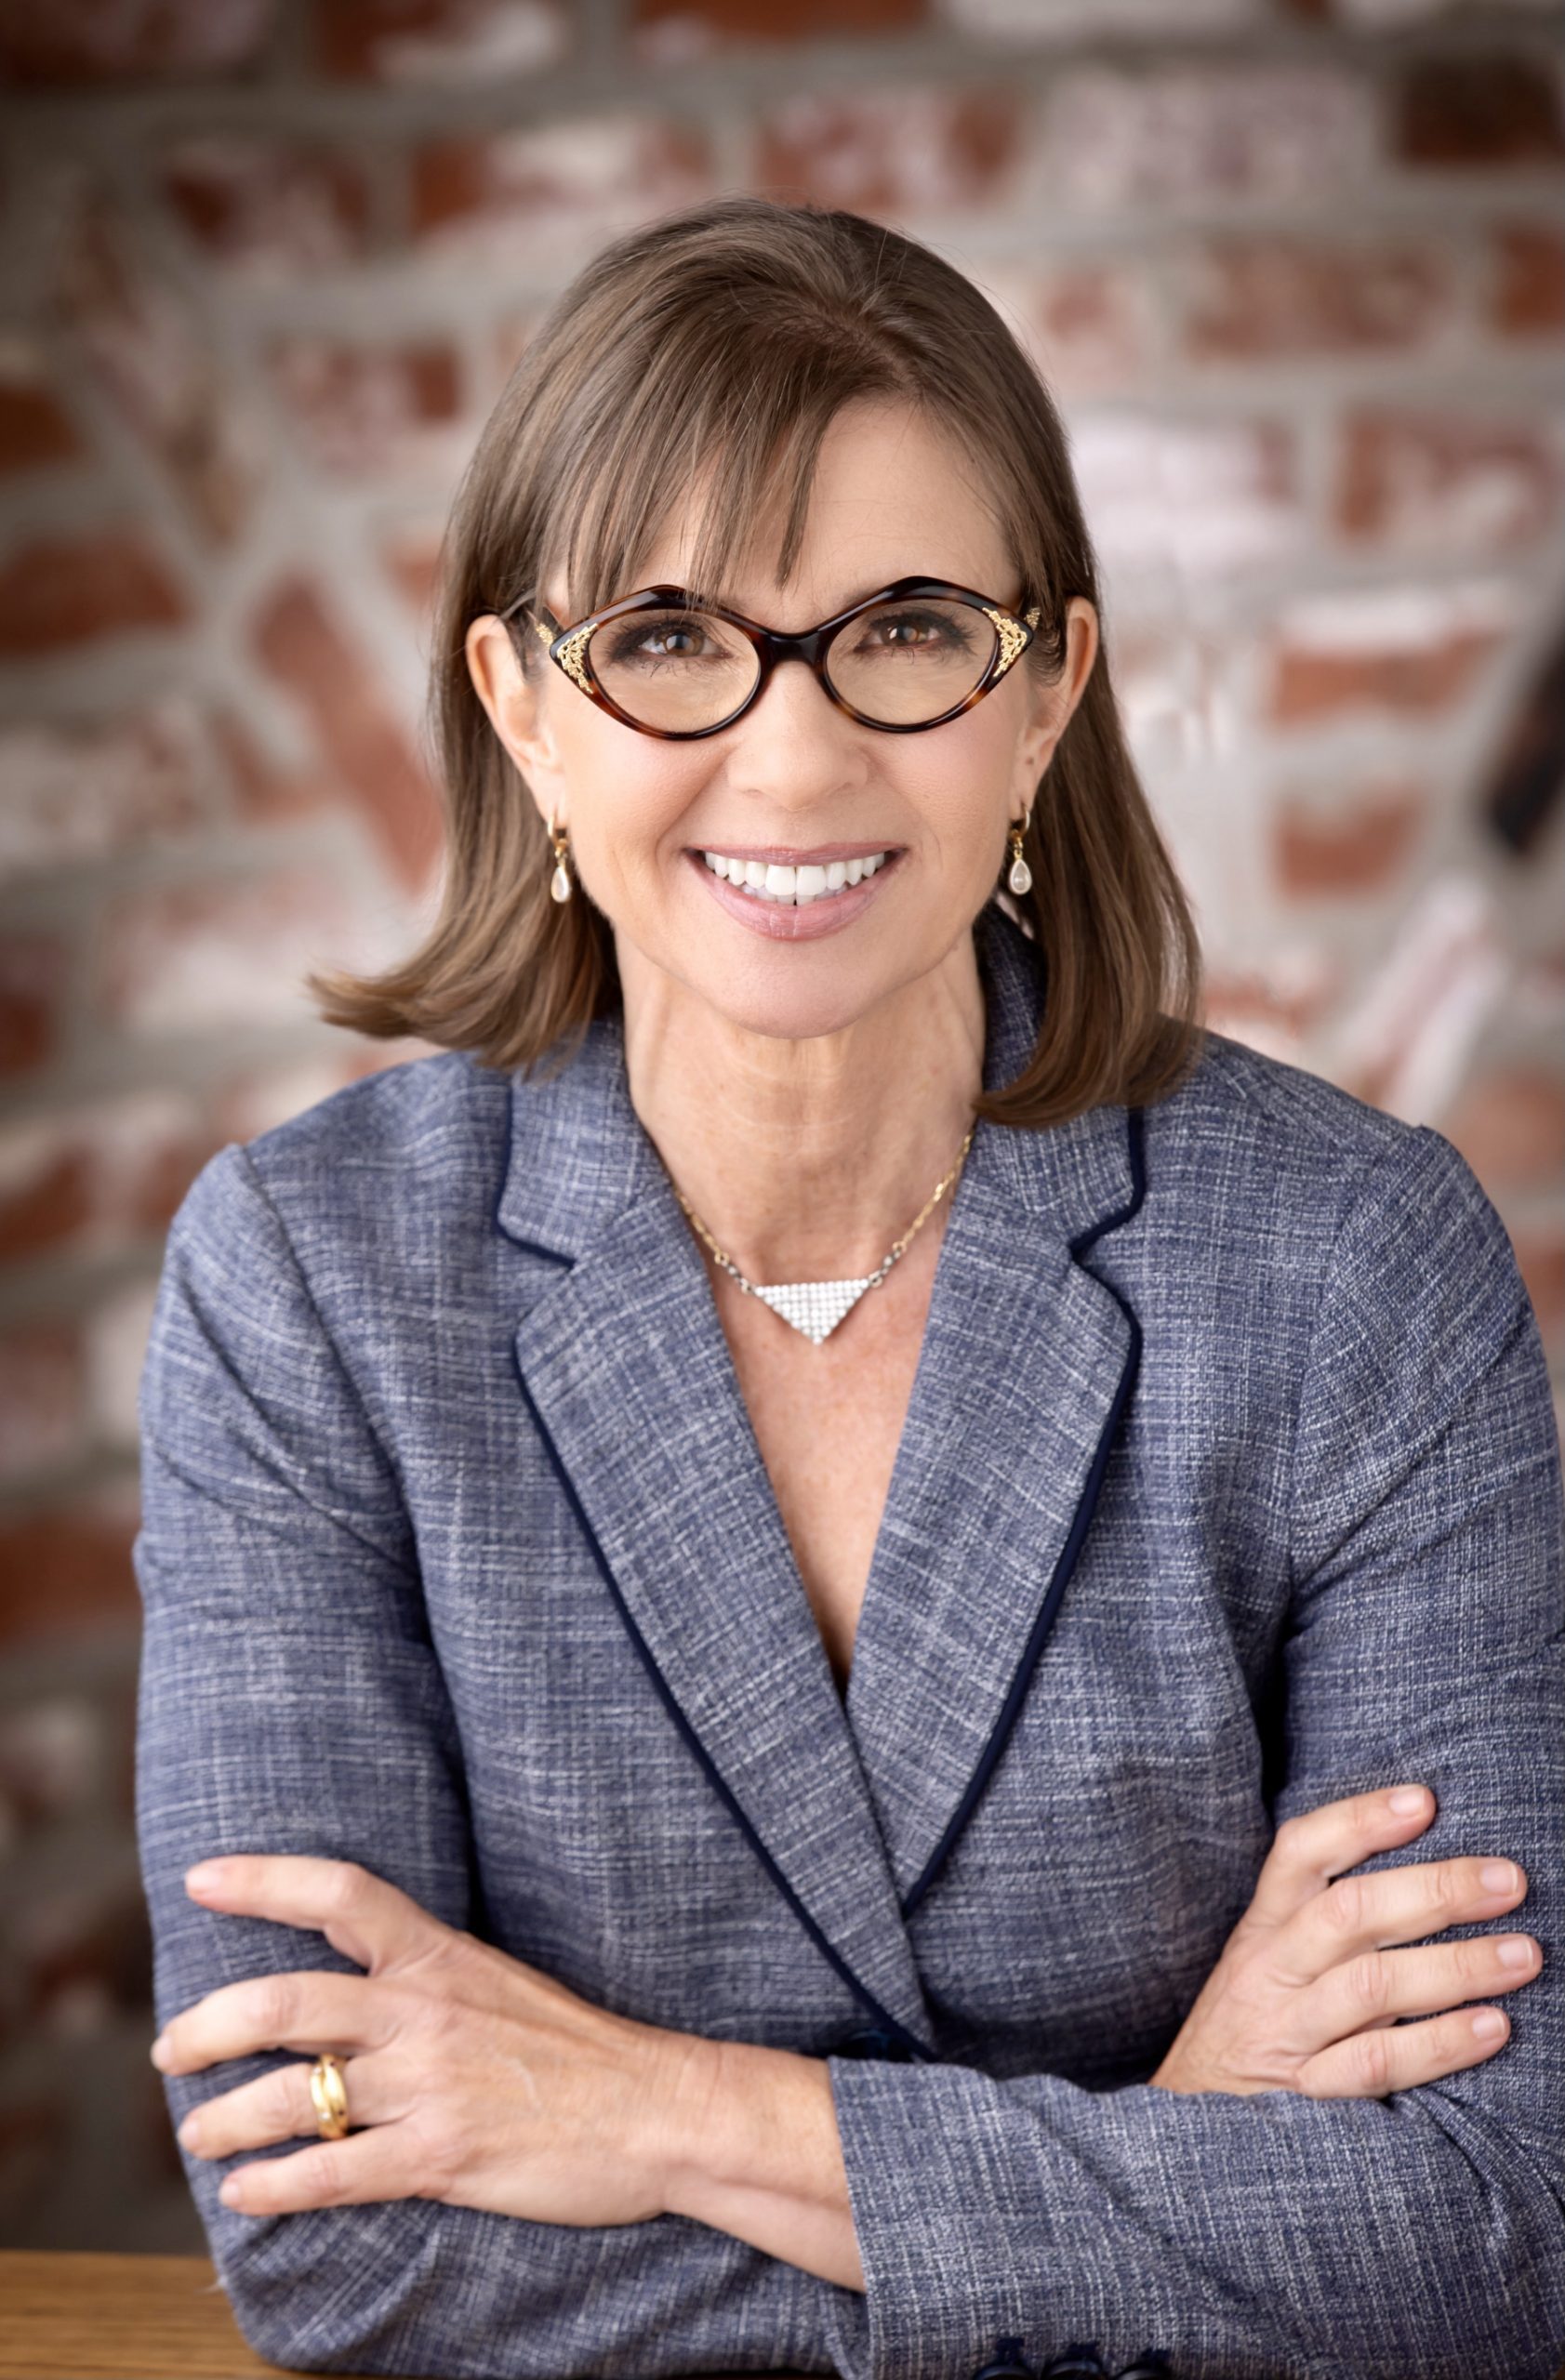 woman folded arms in professional suit and glasses